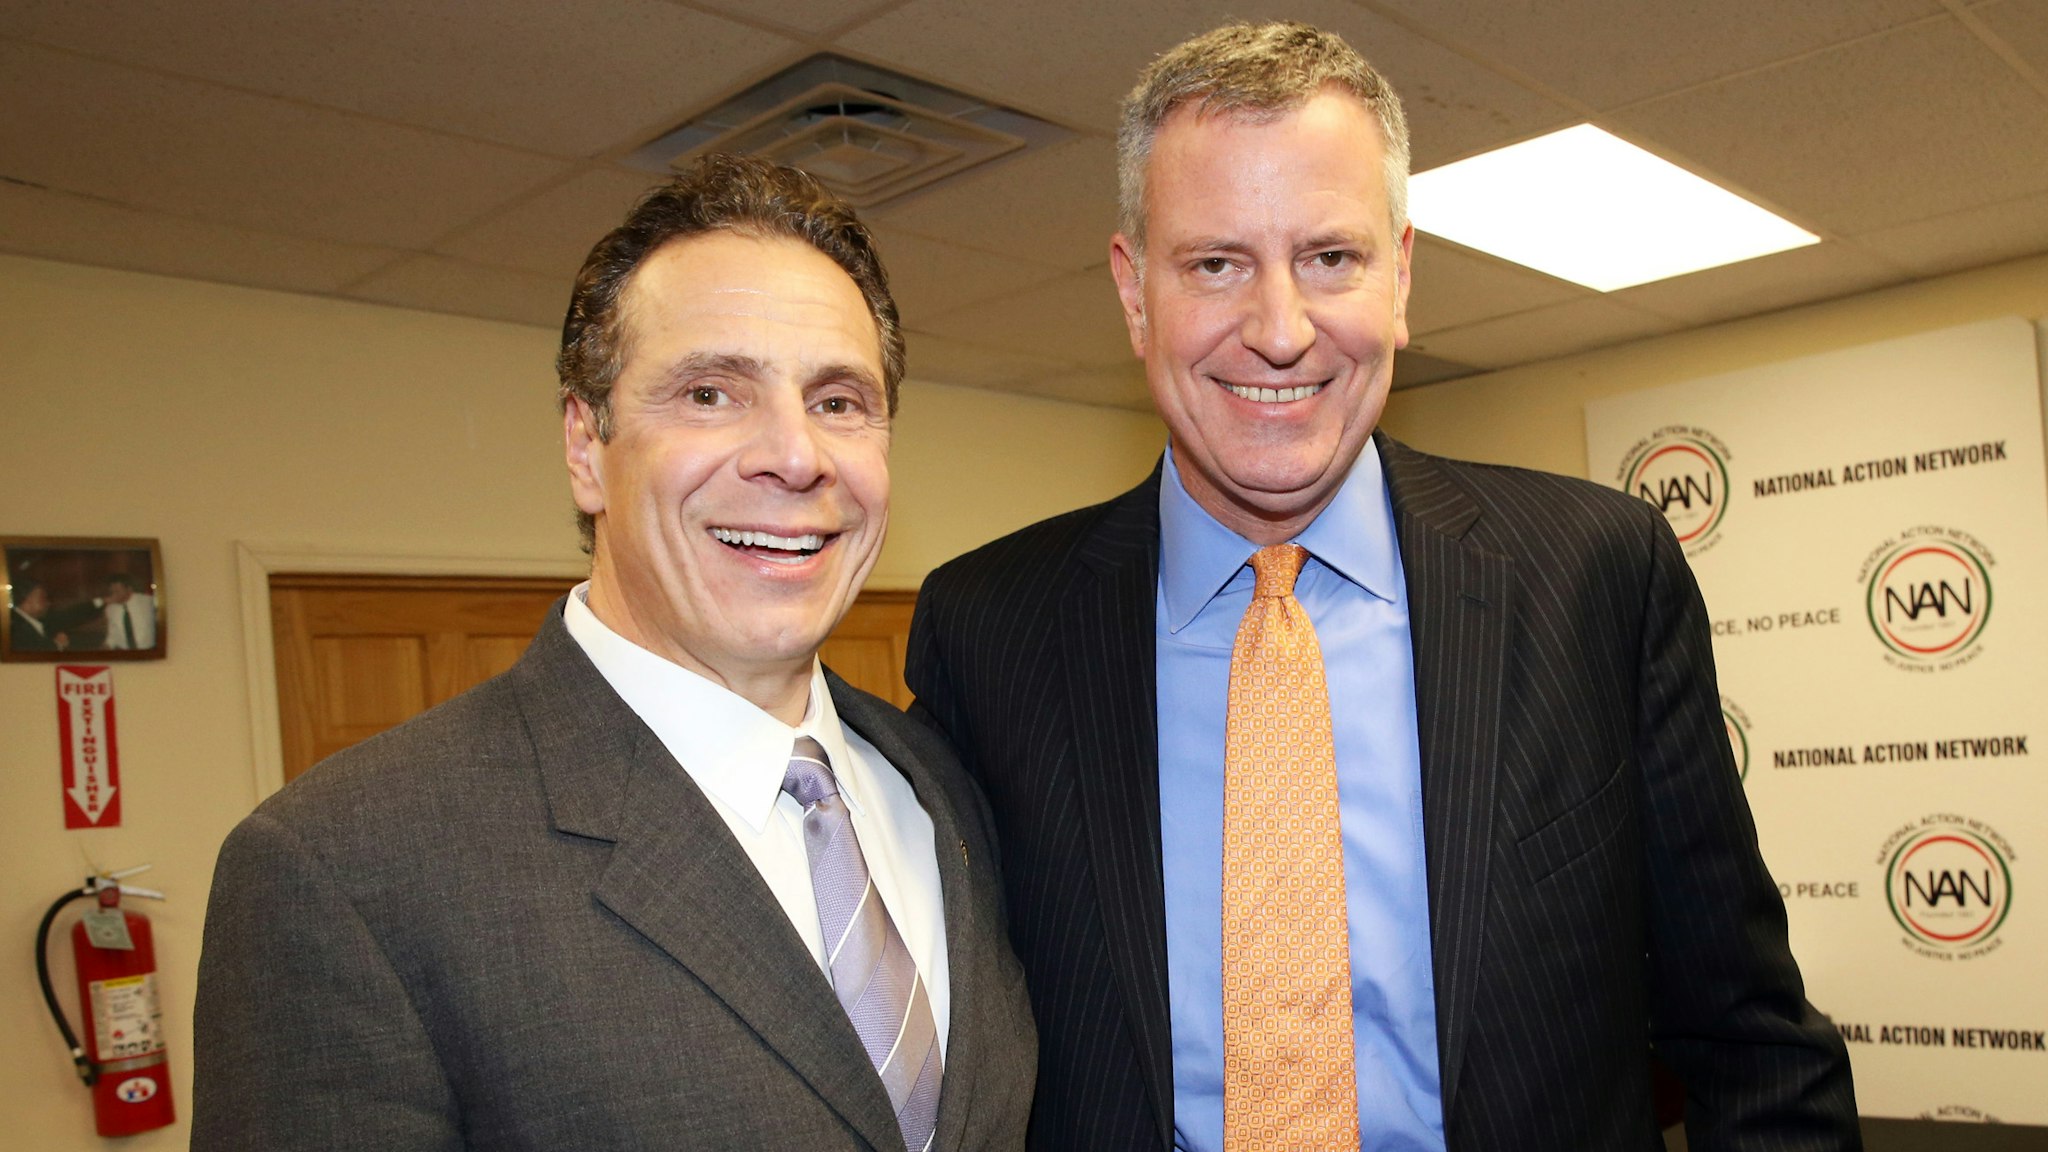 JANUARY 18: (L-R) New York Governor Andrew Cuomo and New York city Mayor Bill de Blasio attend the National Action Network Martin Luther King Day Public Policy Forum on January 18, 2016, in New York City.